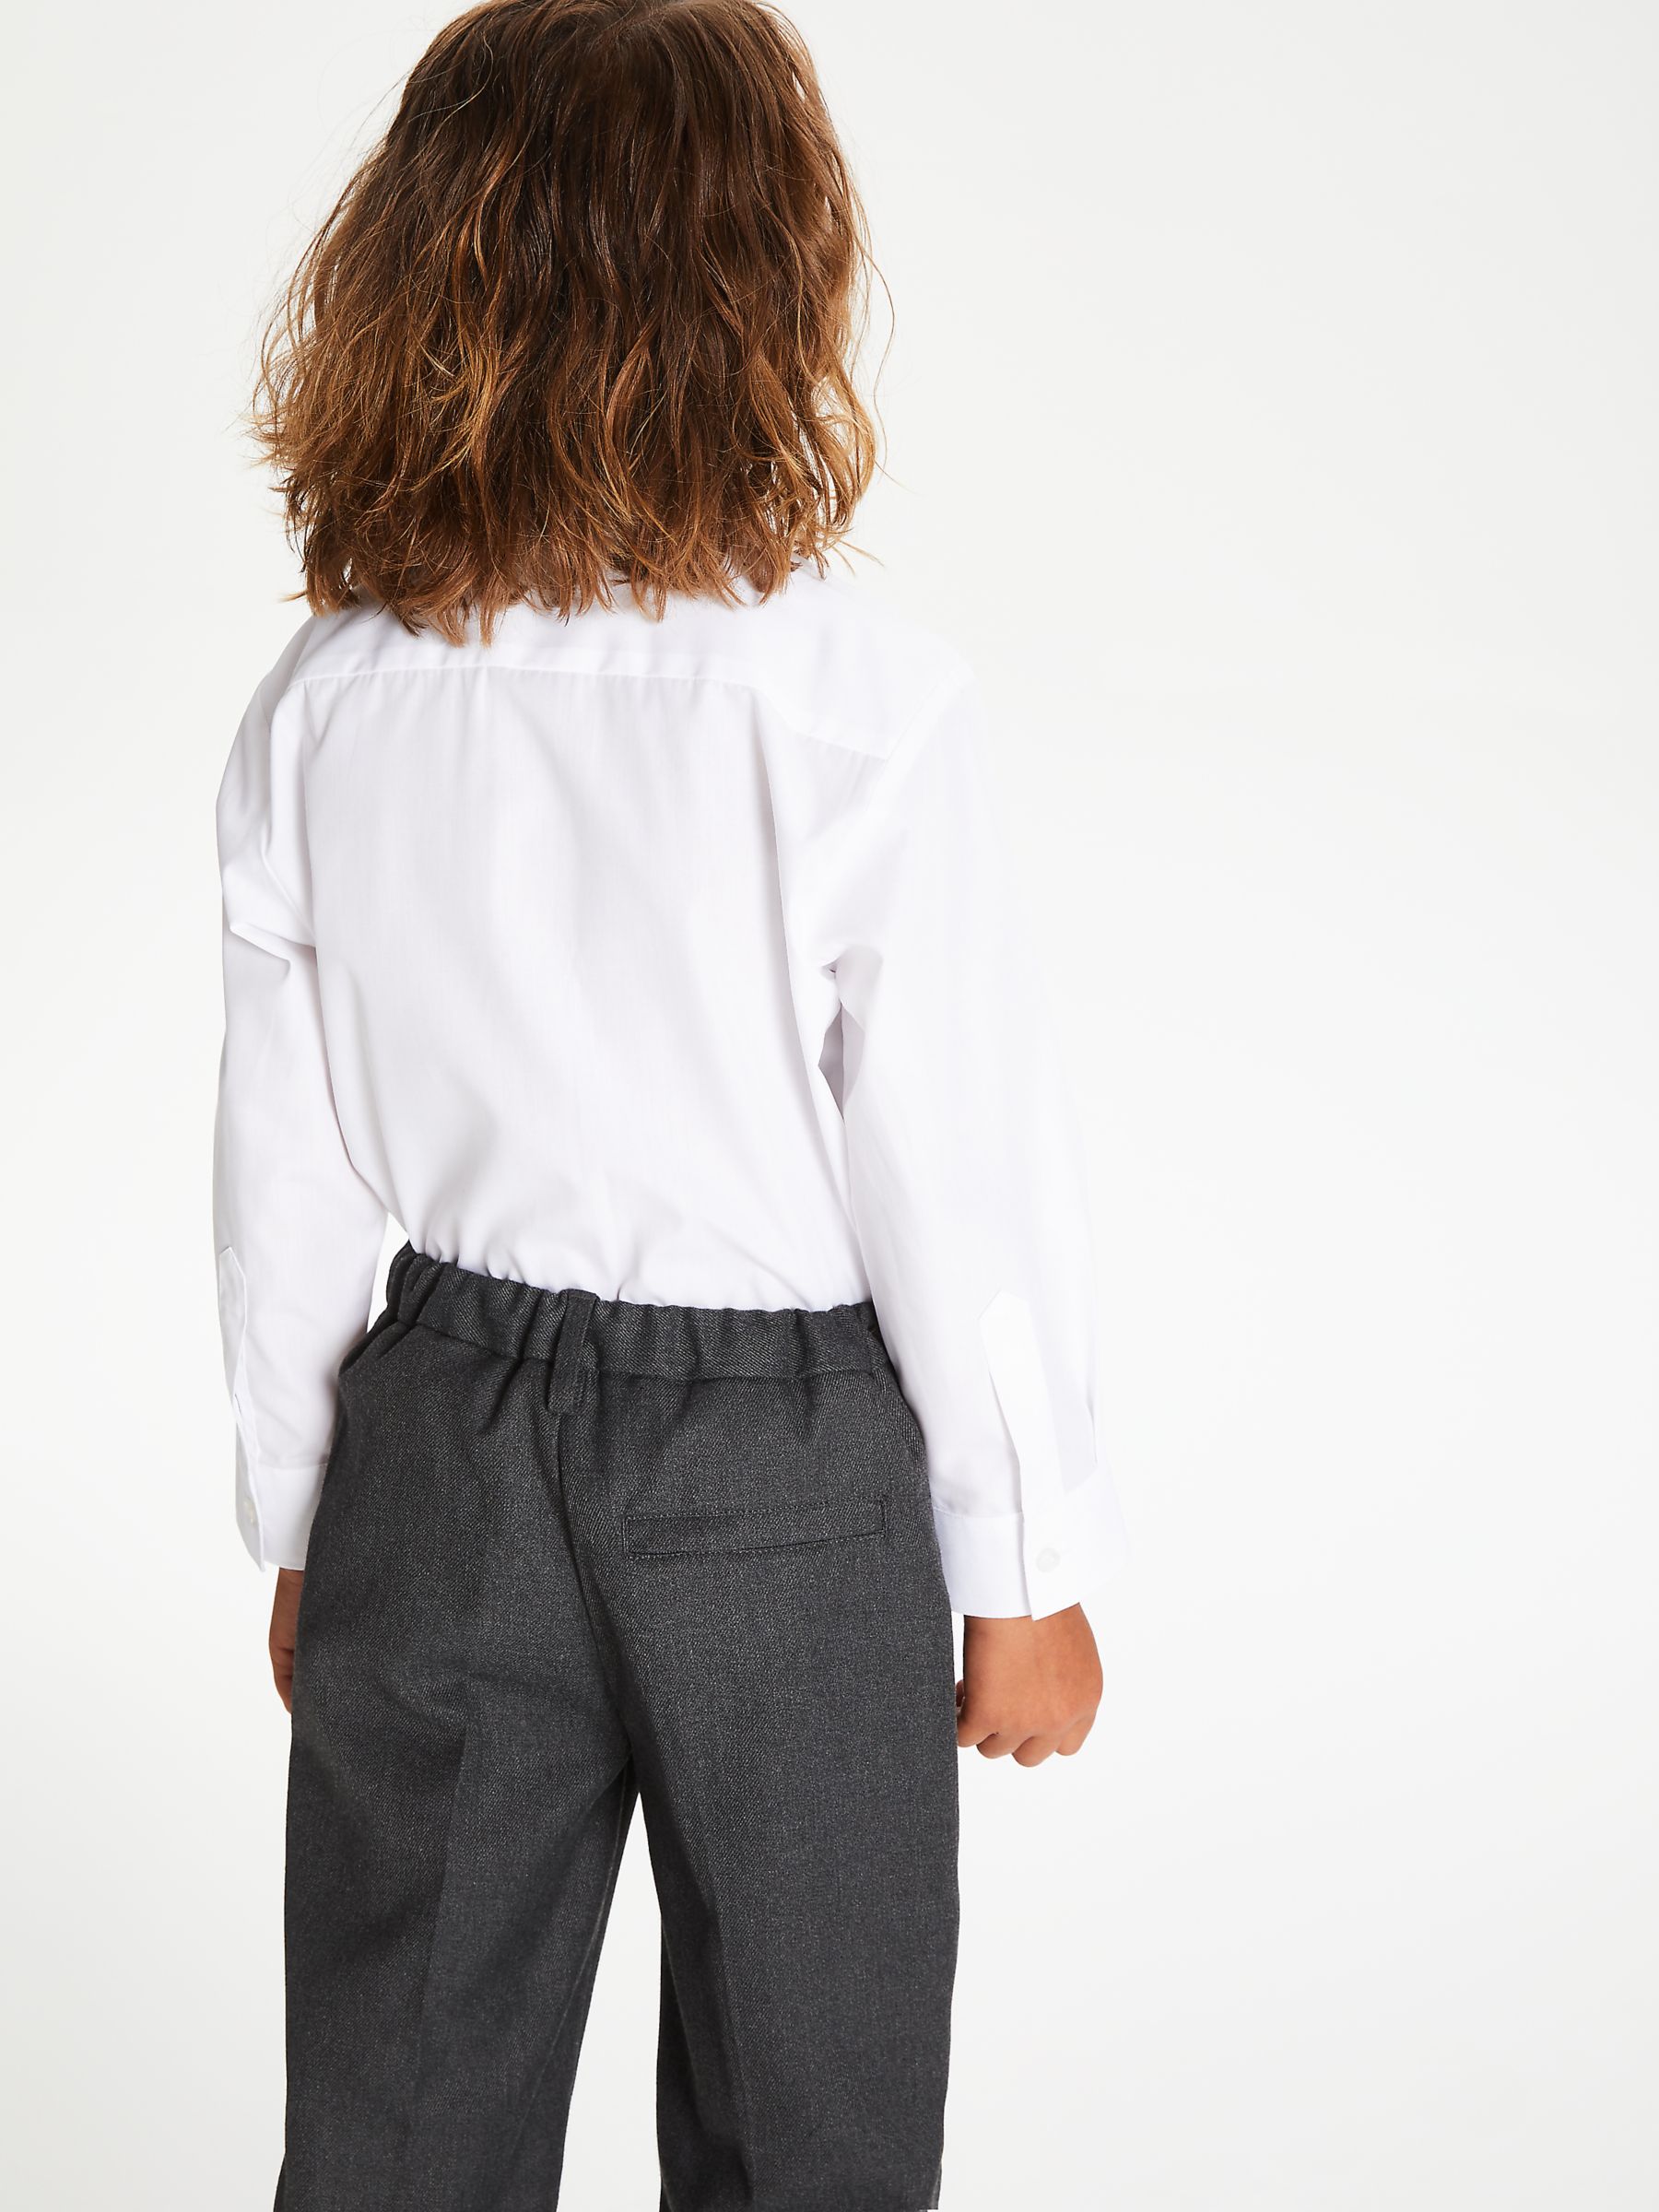 Buy John Lewis ANYDAY The Basics Long Sleeved Shirt, Pack of 3 Online at johnlewis.com